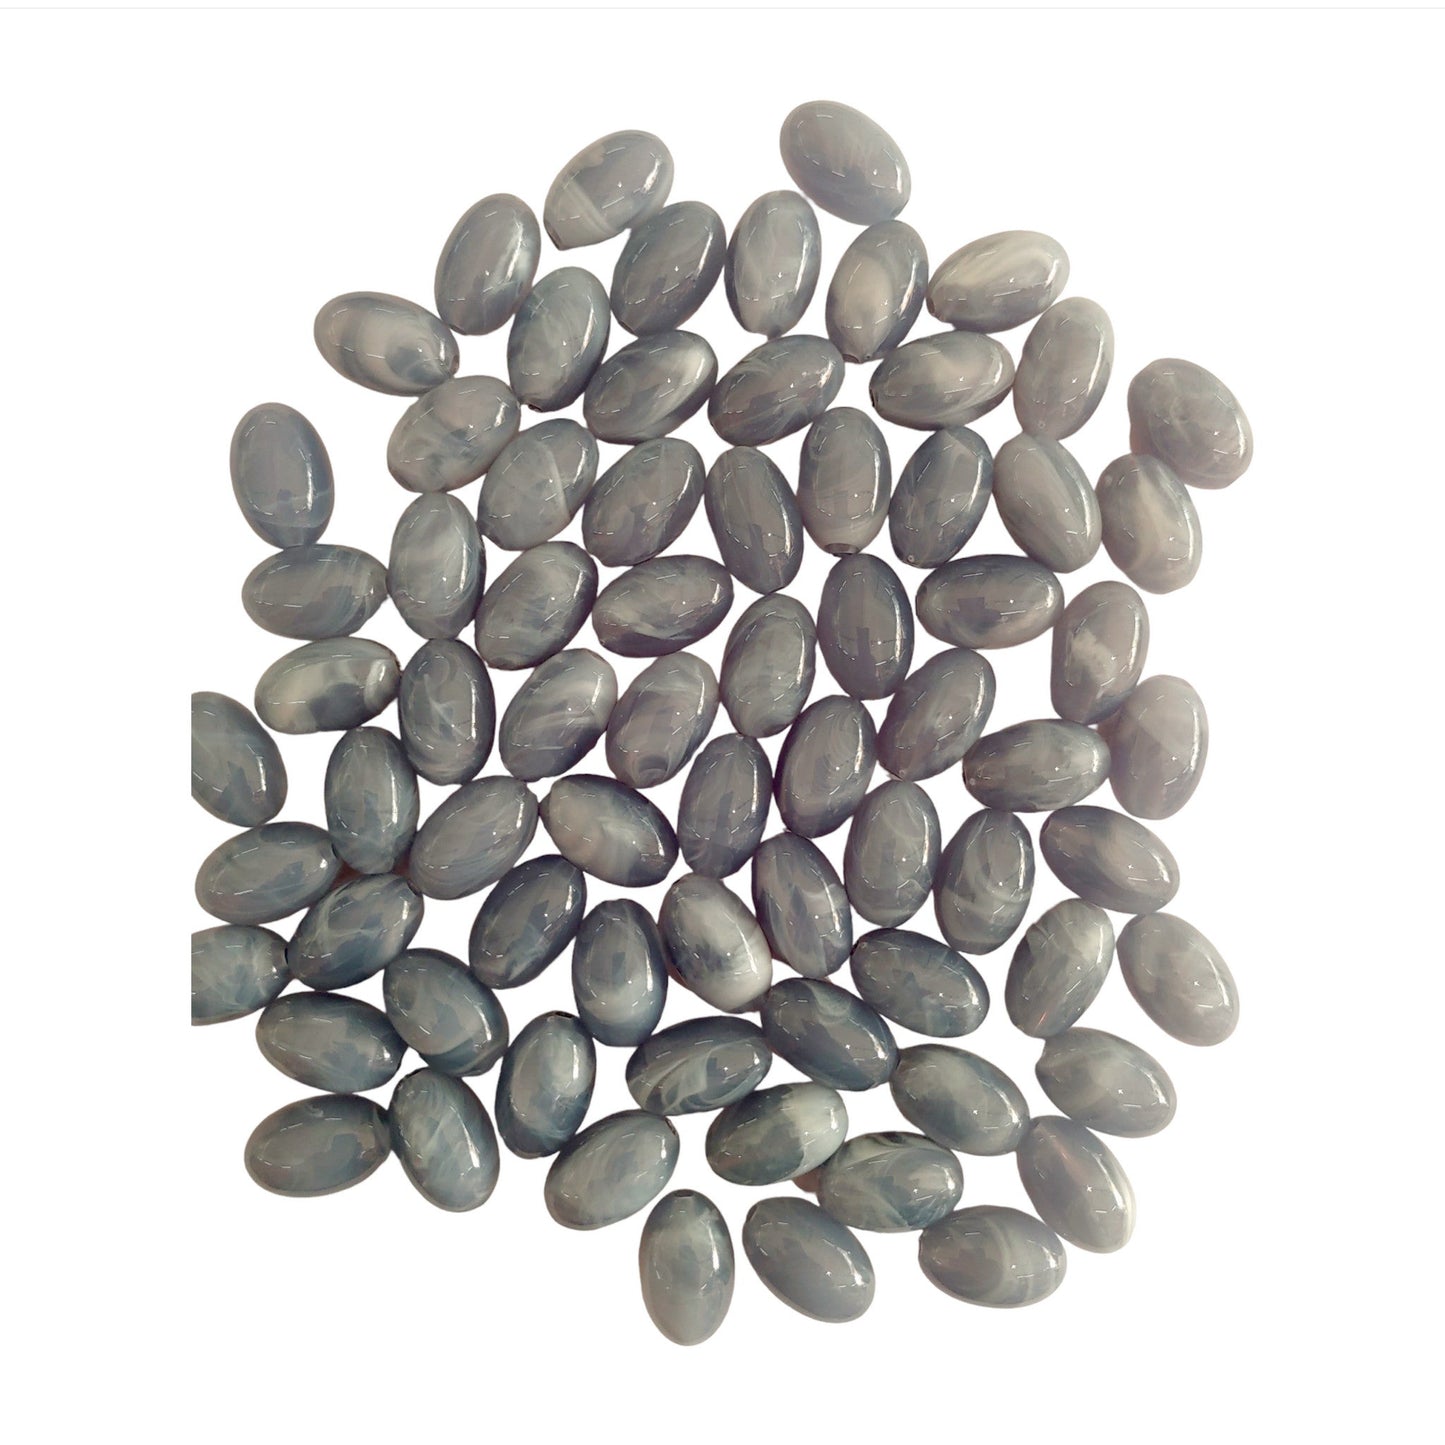 Indian Petals Almond Shaped Color Marble Beads Ideal for Jewelry designing, Gift, Arts and Craft Making